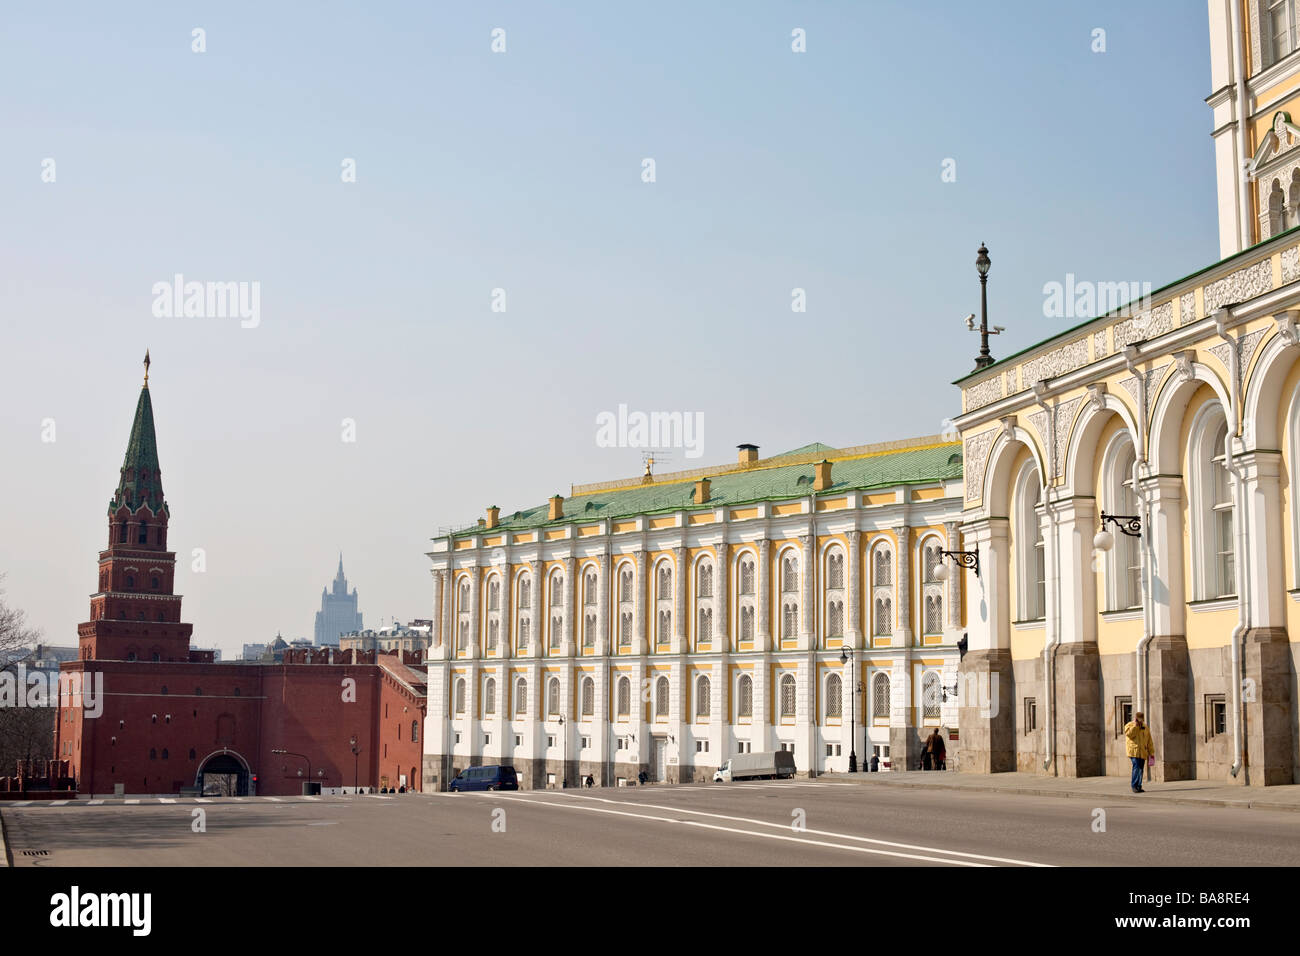 The Great Kremlin Palace, and Kremlin tower, Moscow, Russia Stock Photo